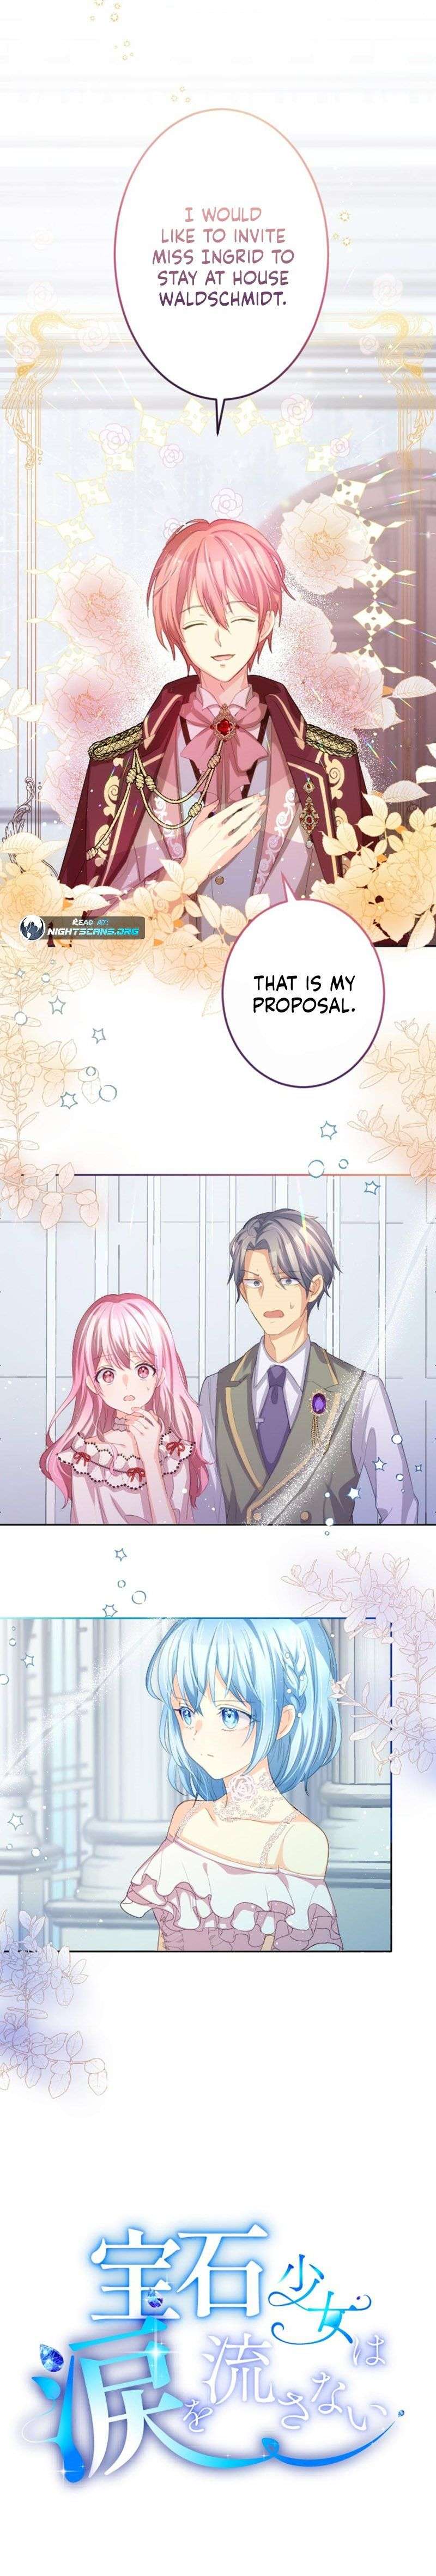 The Precious Girl Does Not Shed Tears - chapter 7 - #2